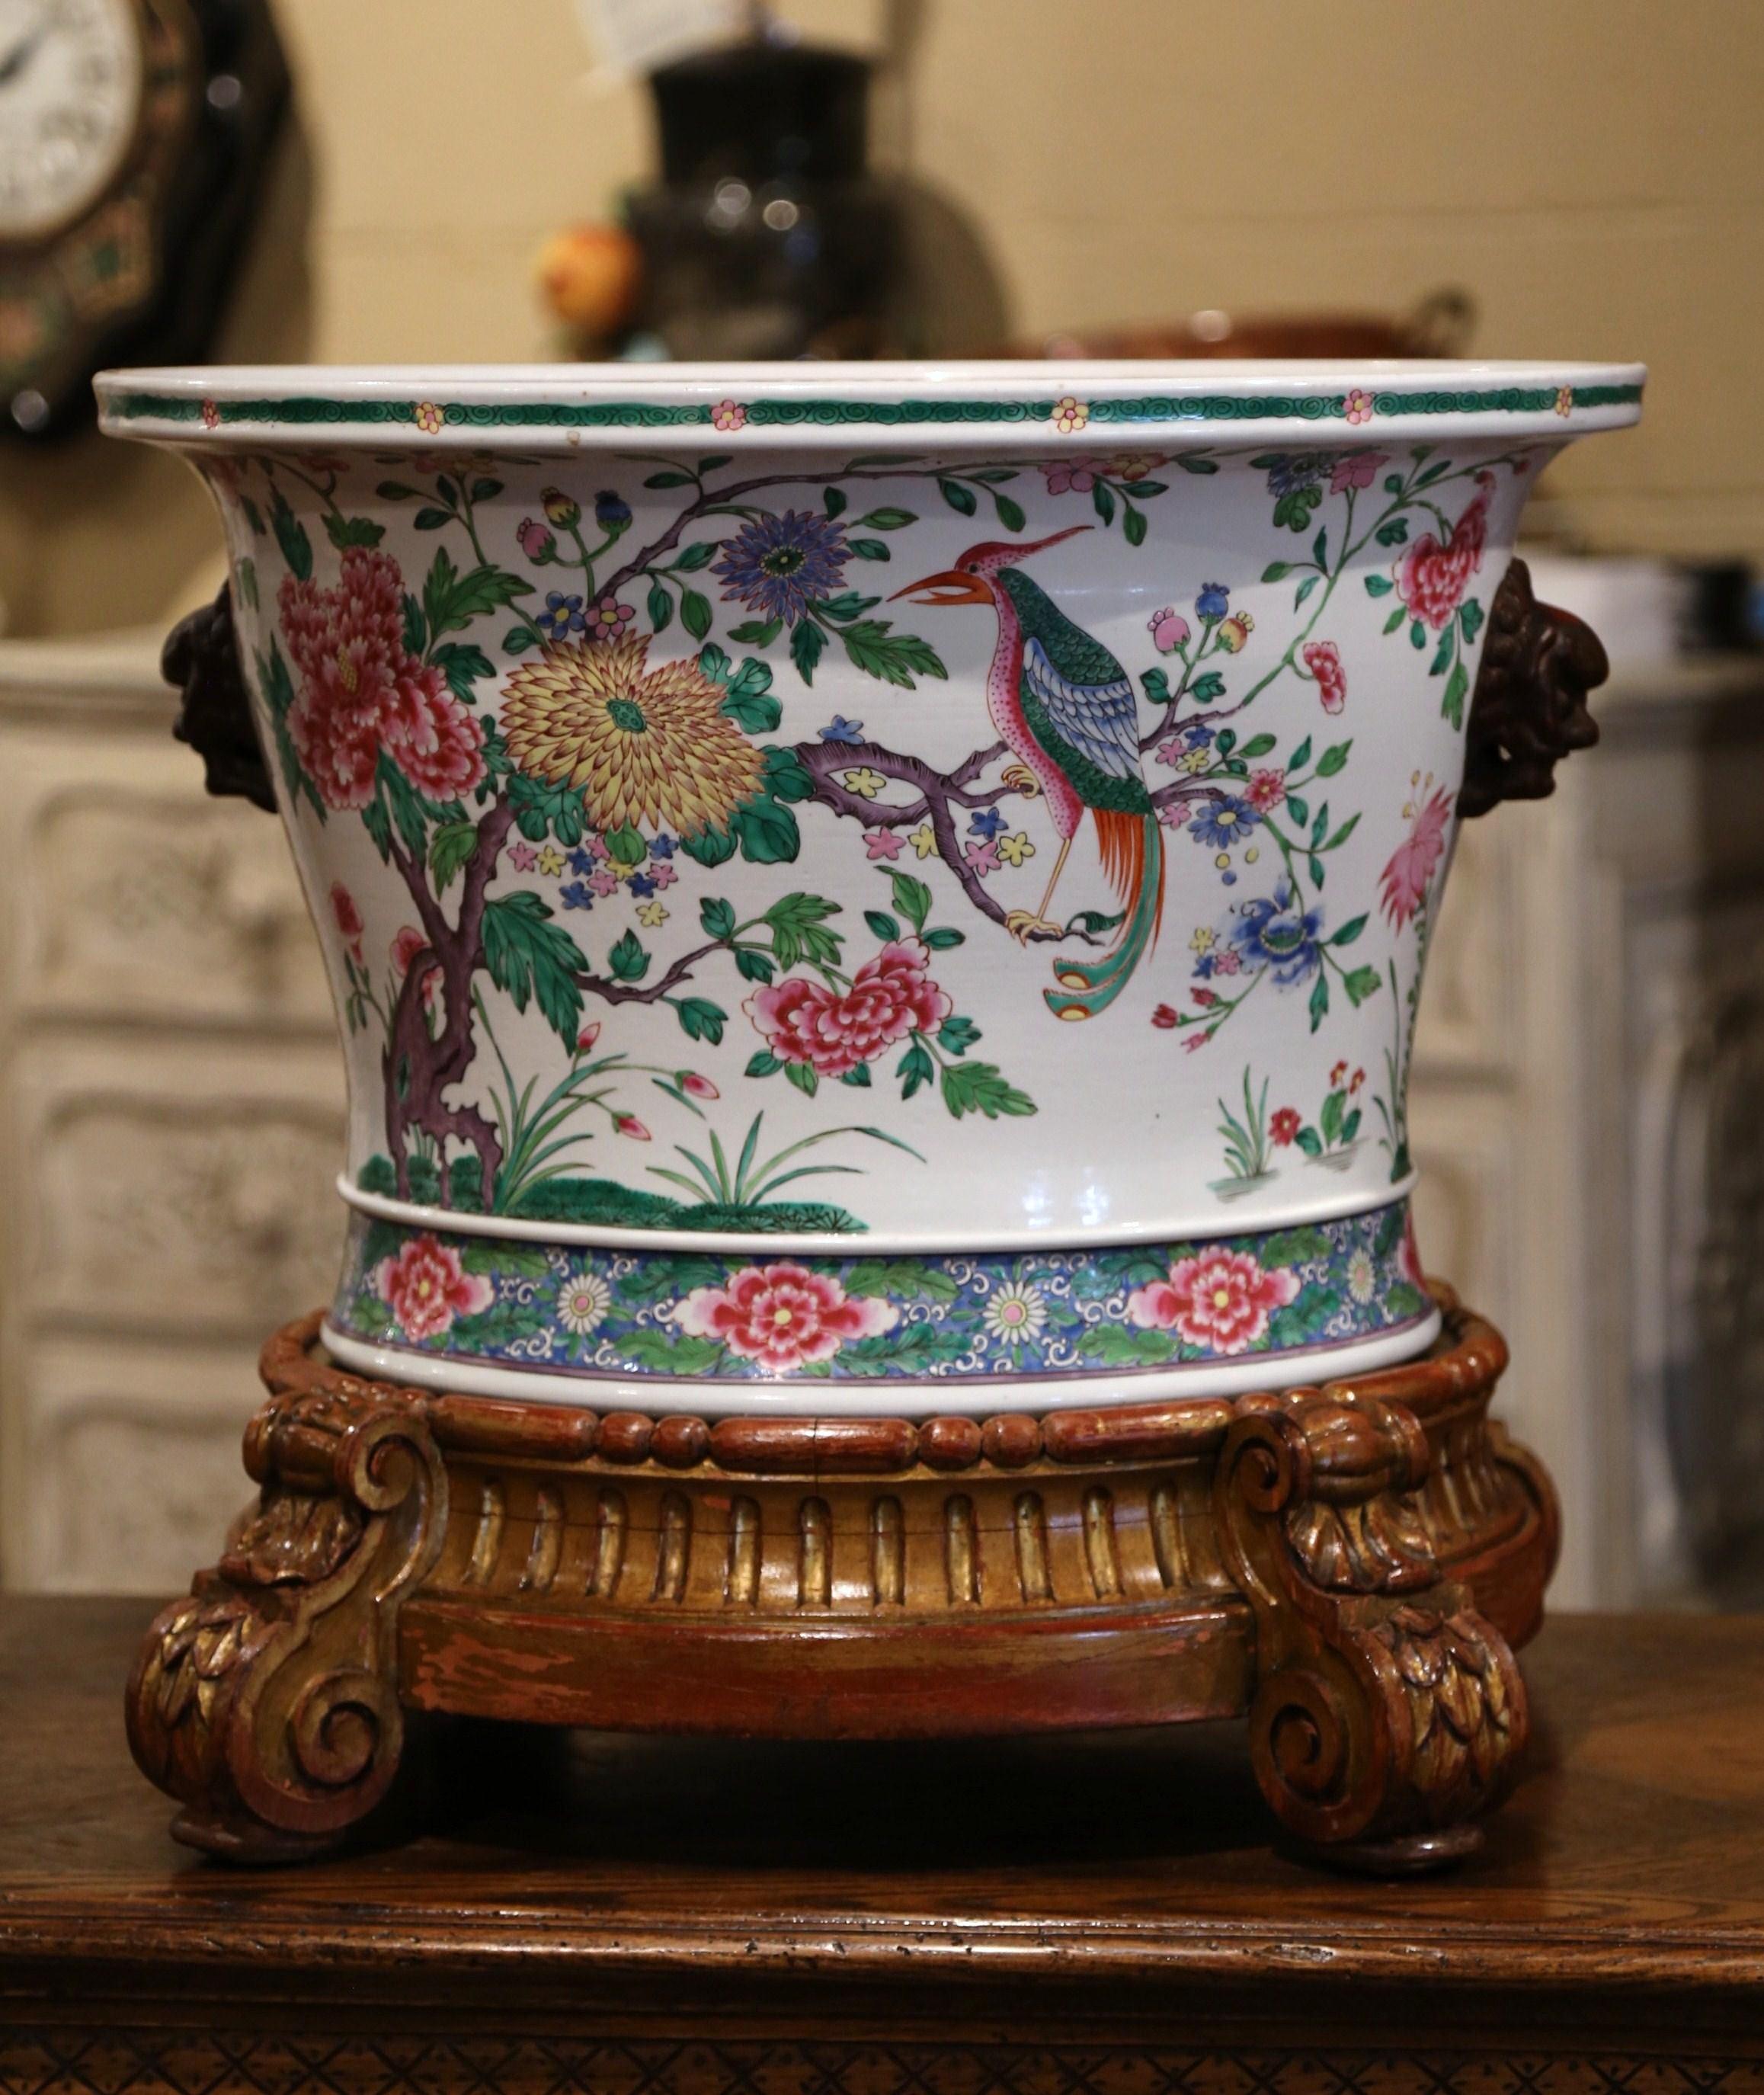 This elegant, colorful antique fishbowl was created in China, circa 1860. Round in shape with figural side handles, the large porcelain cache pot stands on the original carved giltwood base with scroll feet; the bowl features Classical Asian floral